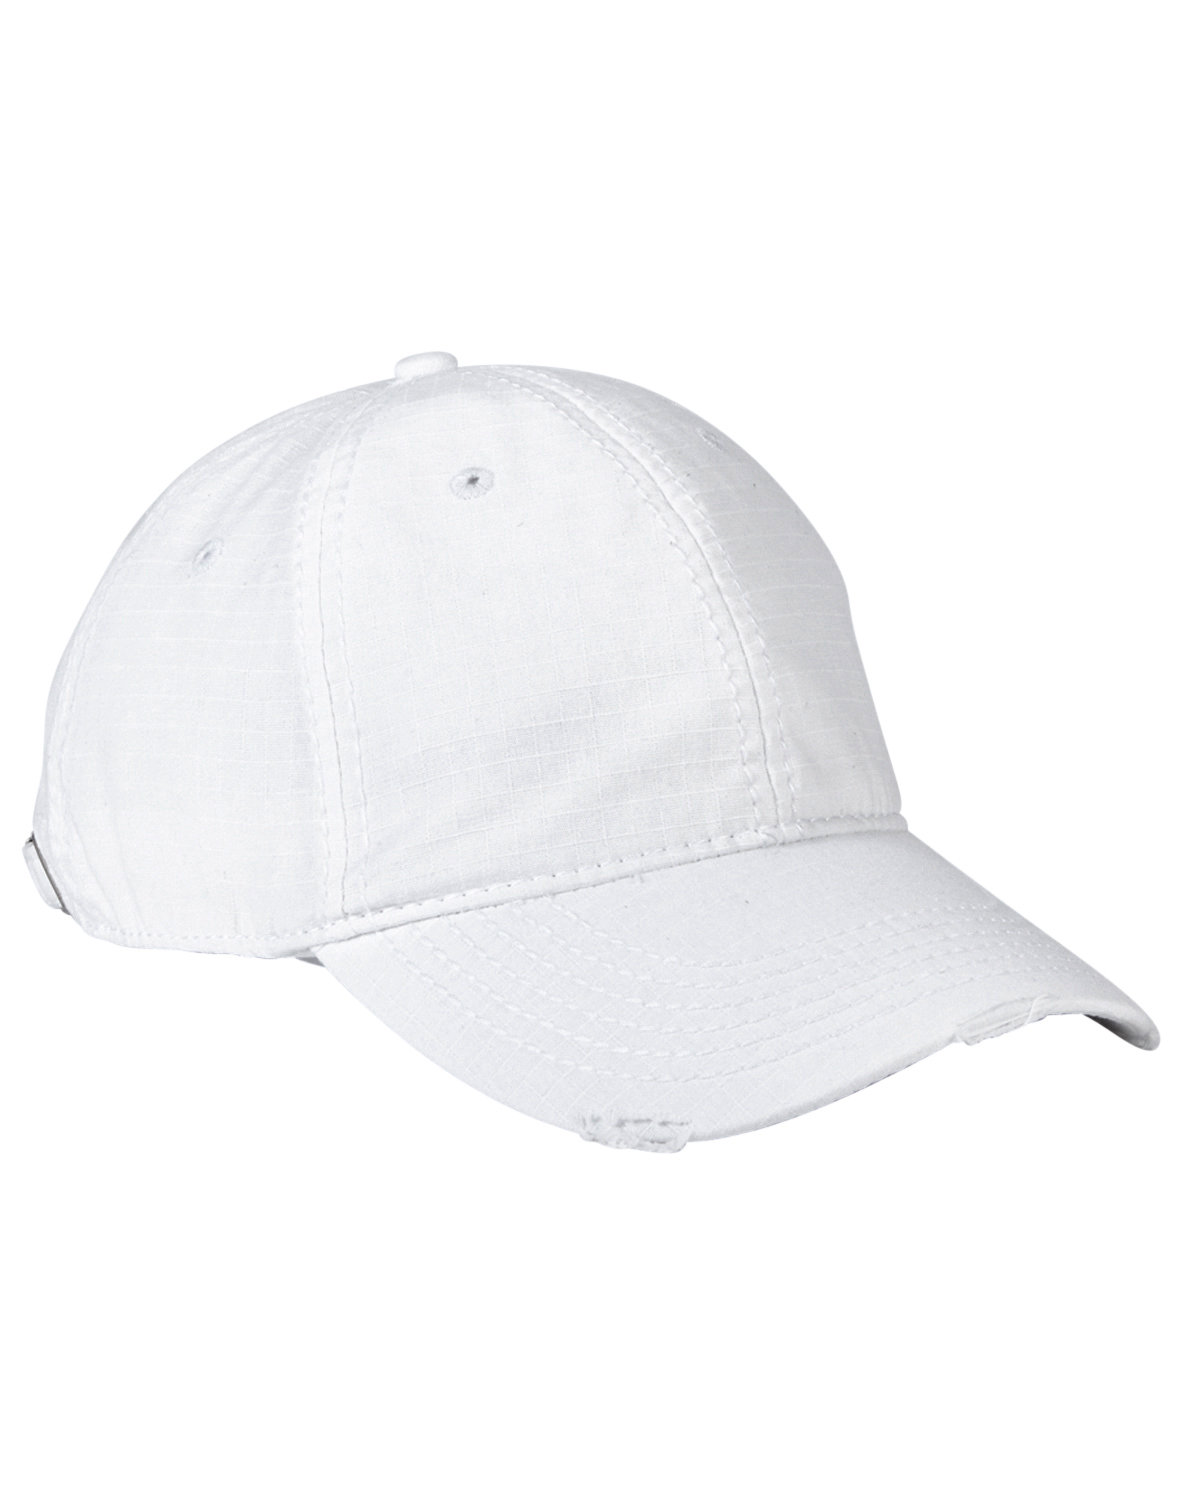 Front view of Distressed Image Maker Cap